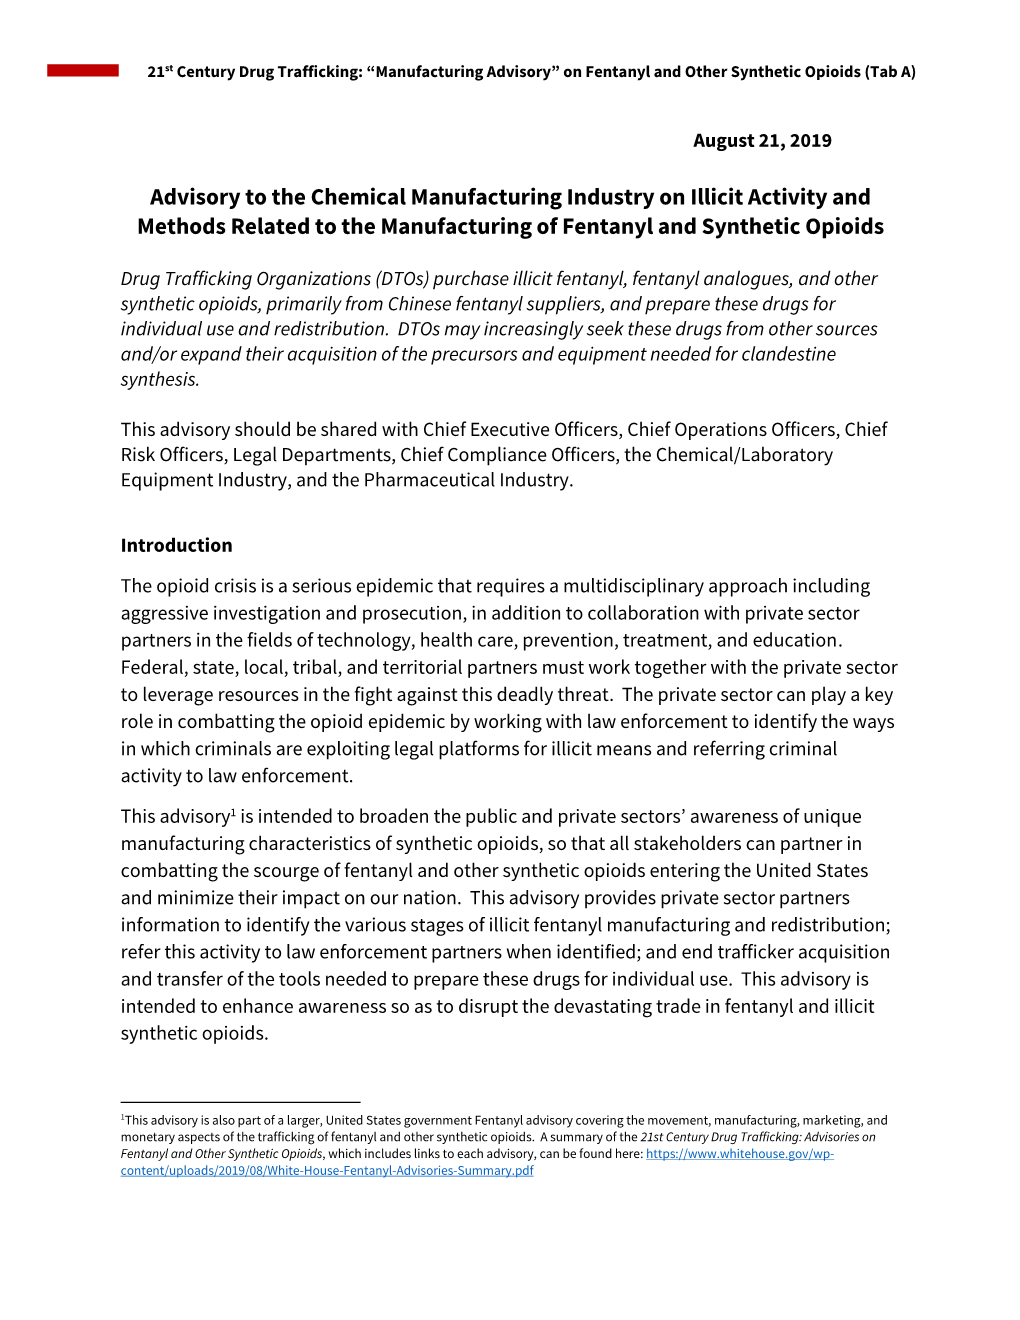 Fentanyl Advisory Covering the Movement, Manufacturing, Marketing, and Monetary Aspects of the Trafficking of Fentanyl and Other Synthetic Opioids